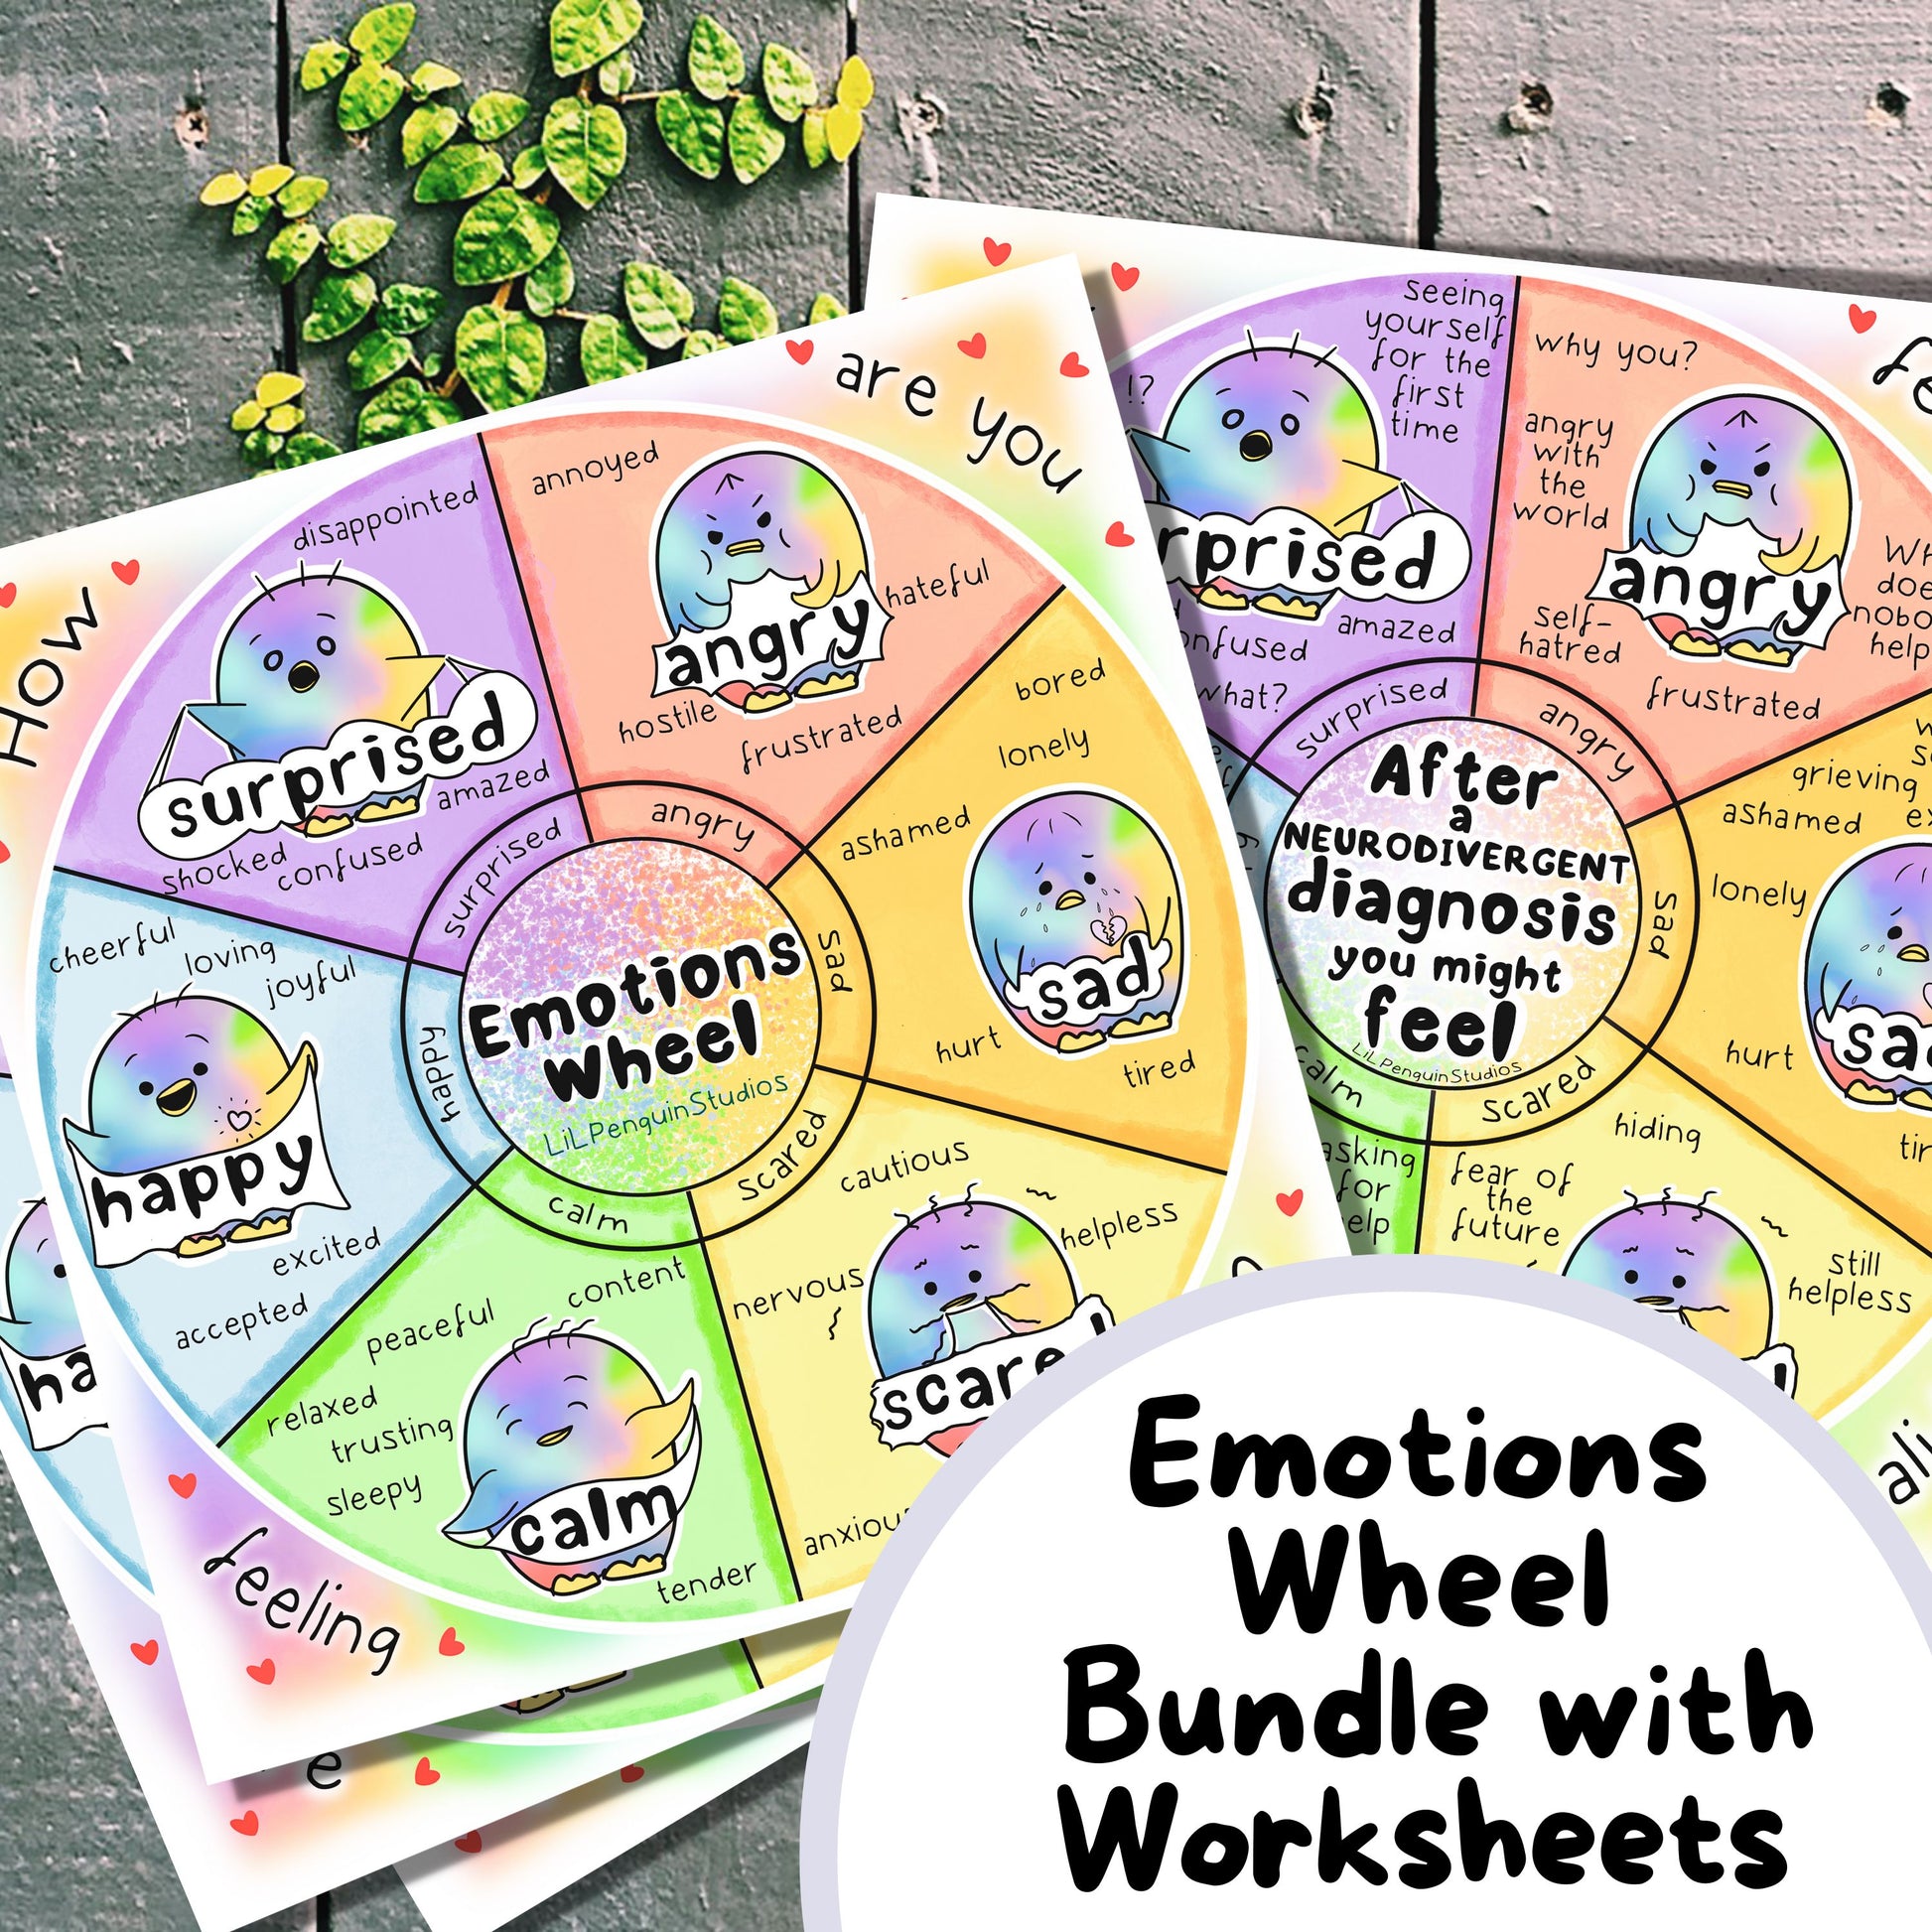 Emotions Wheel Bundle with blank worksheets for neurodivergent people and their families.